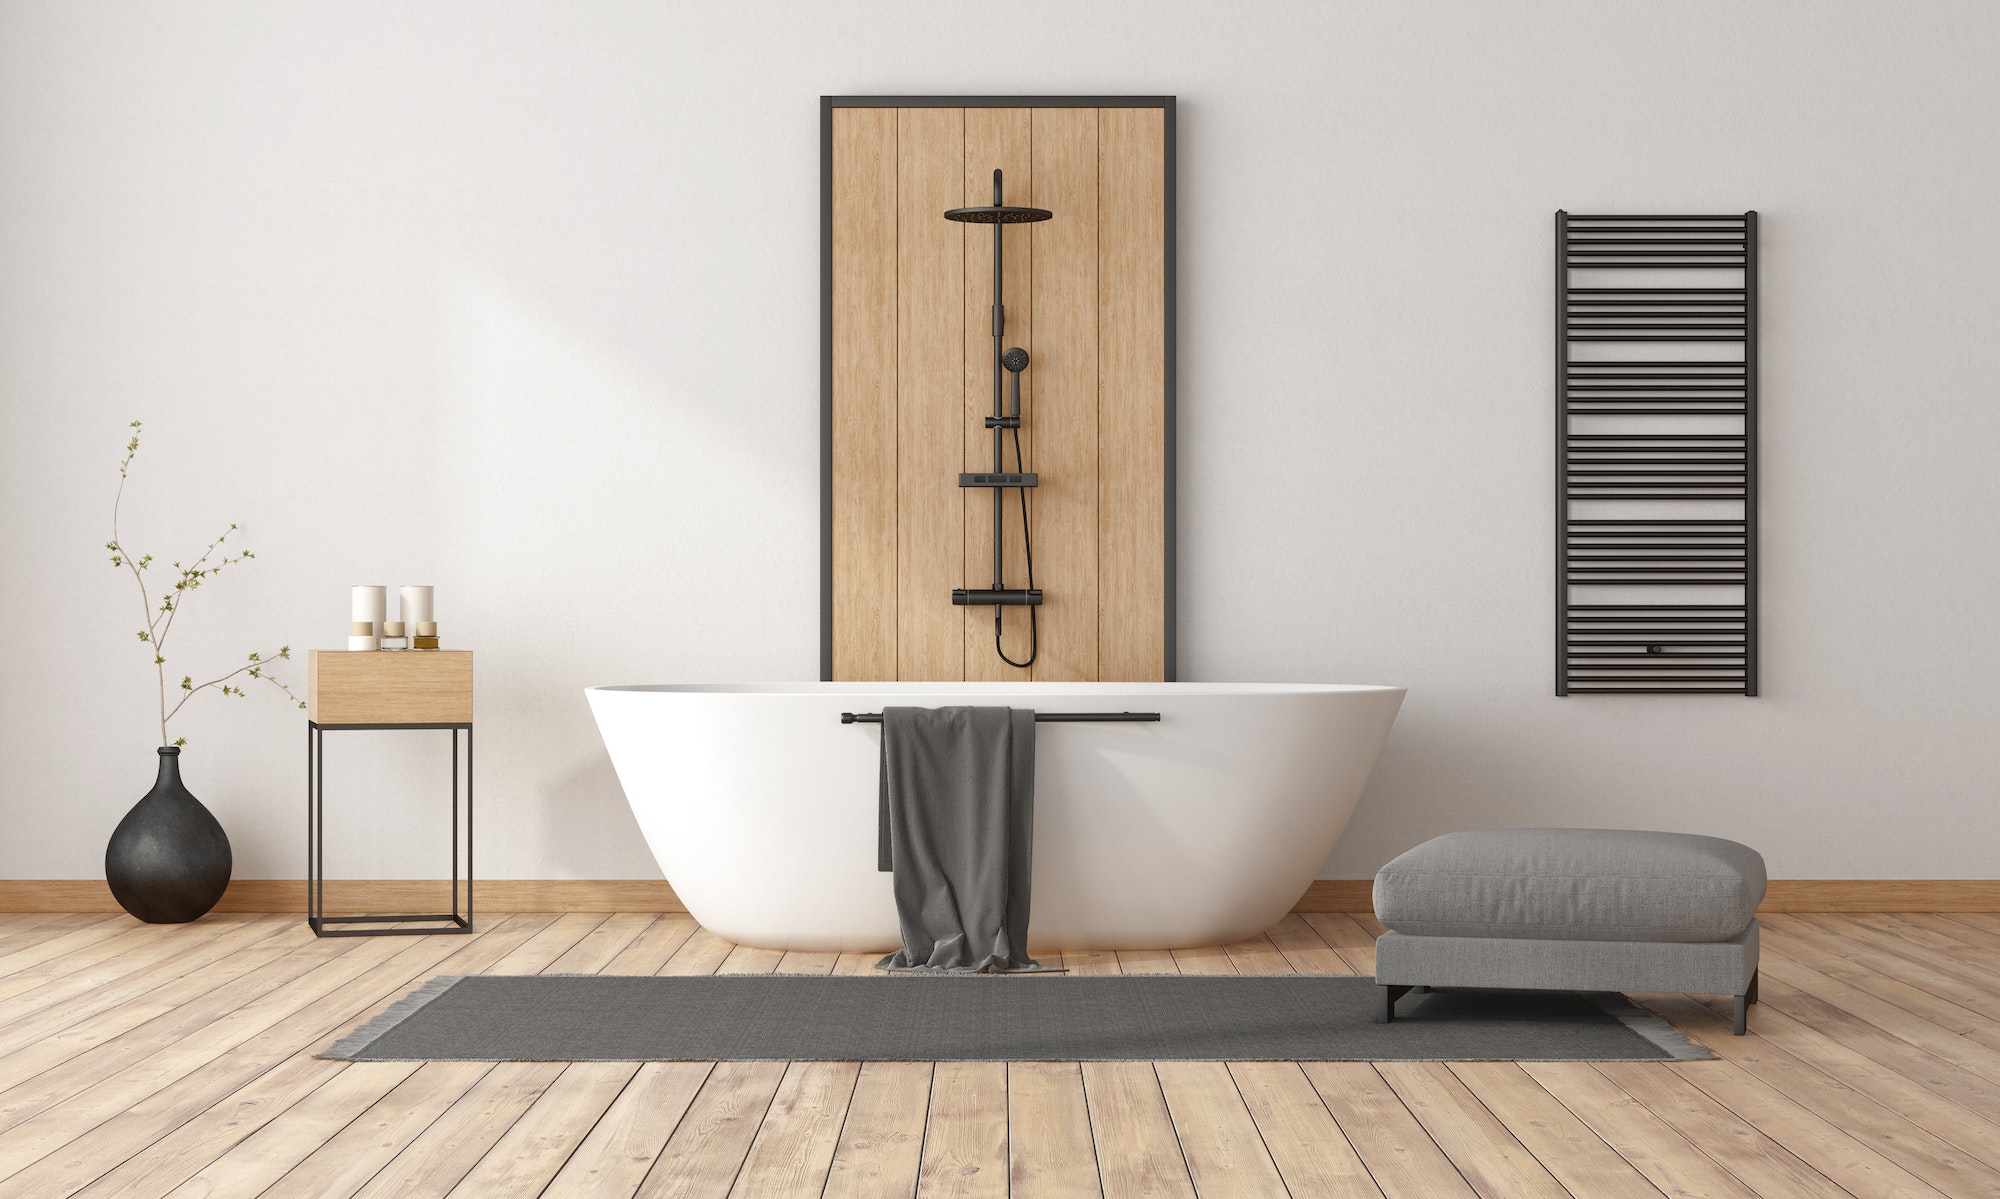 10 Chic Minimalist Bathroom Ideas With Neutral-Toned Tiles And Woods